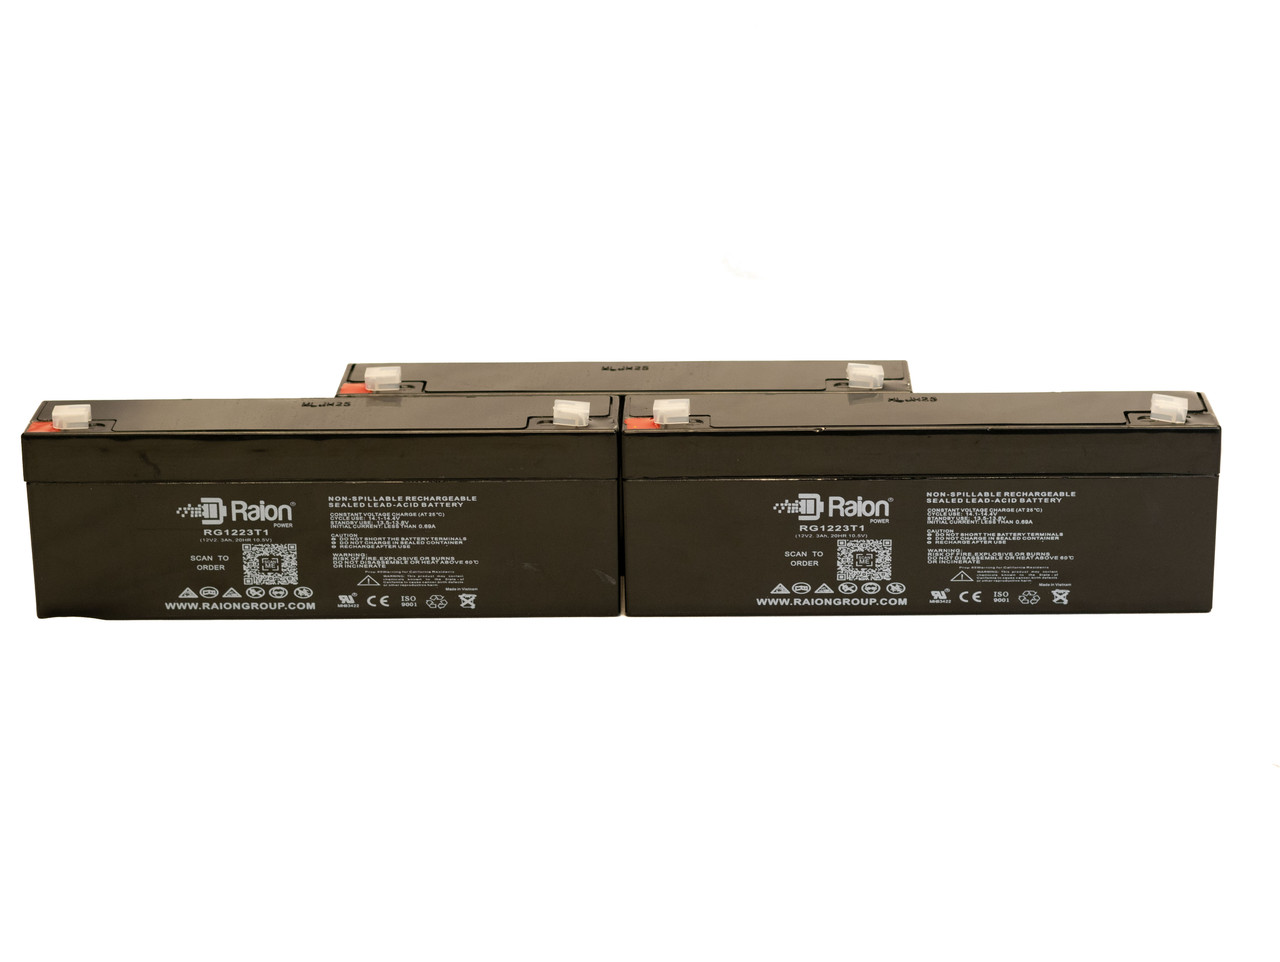 Raion Power 12V 2.3Ah RG1223T1 Replacement Medical Battery for Datex-Ohmeda Modulus SE - 3 Pack